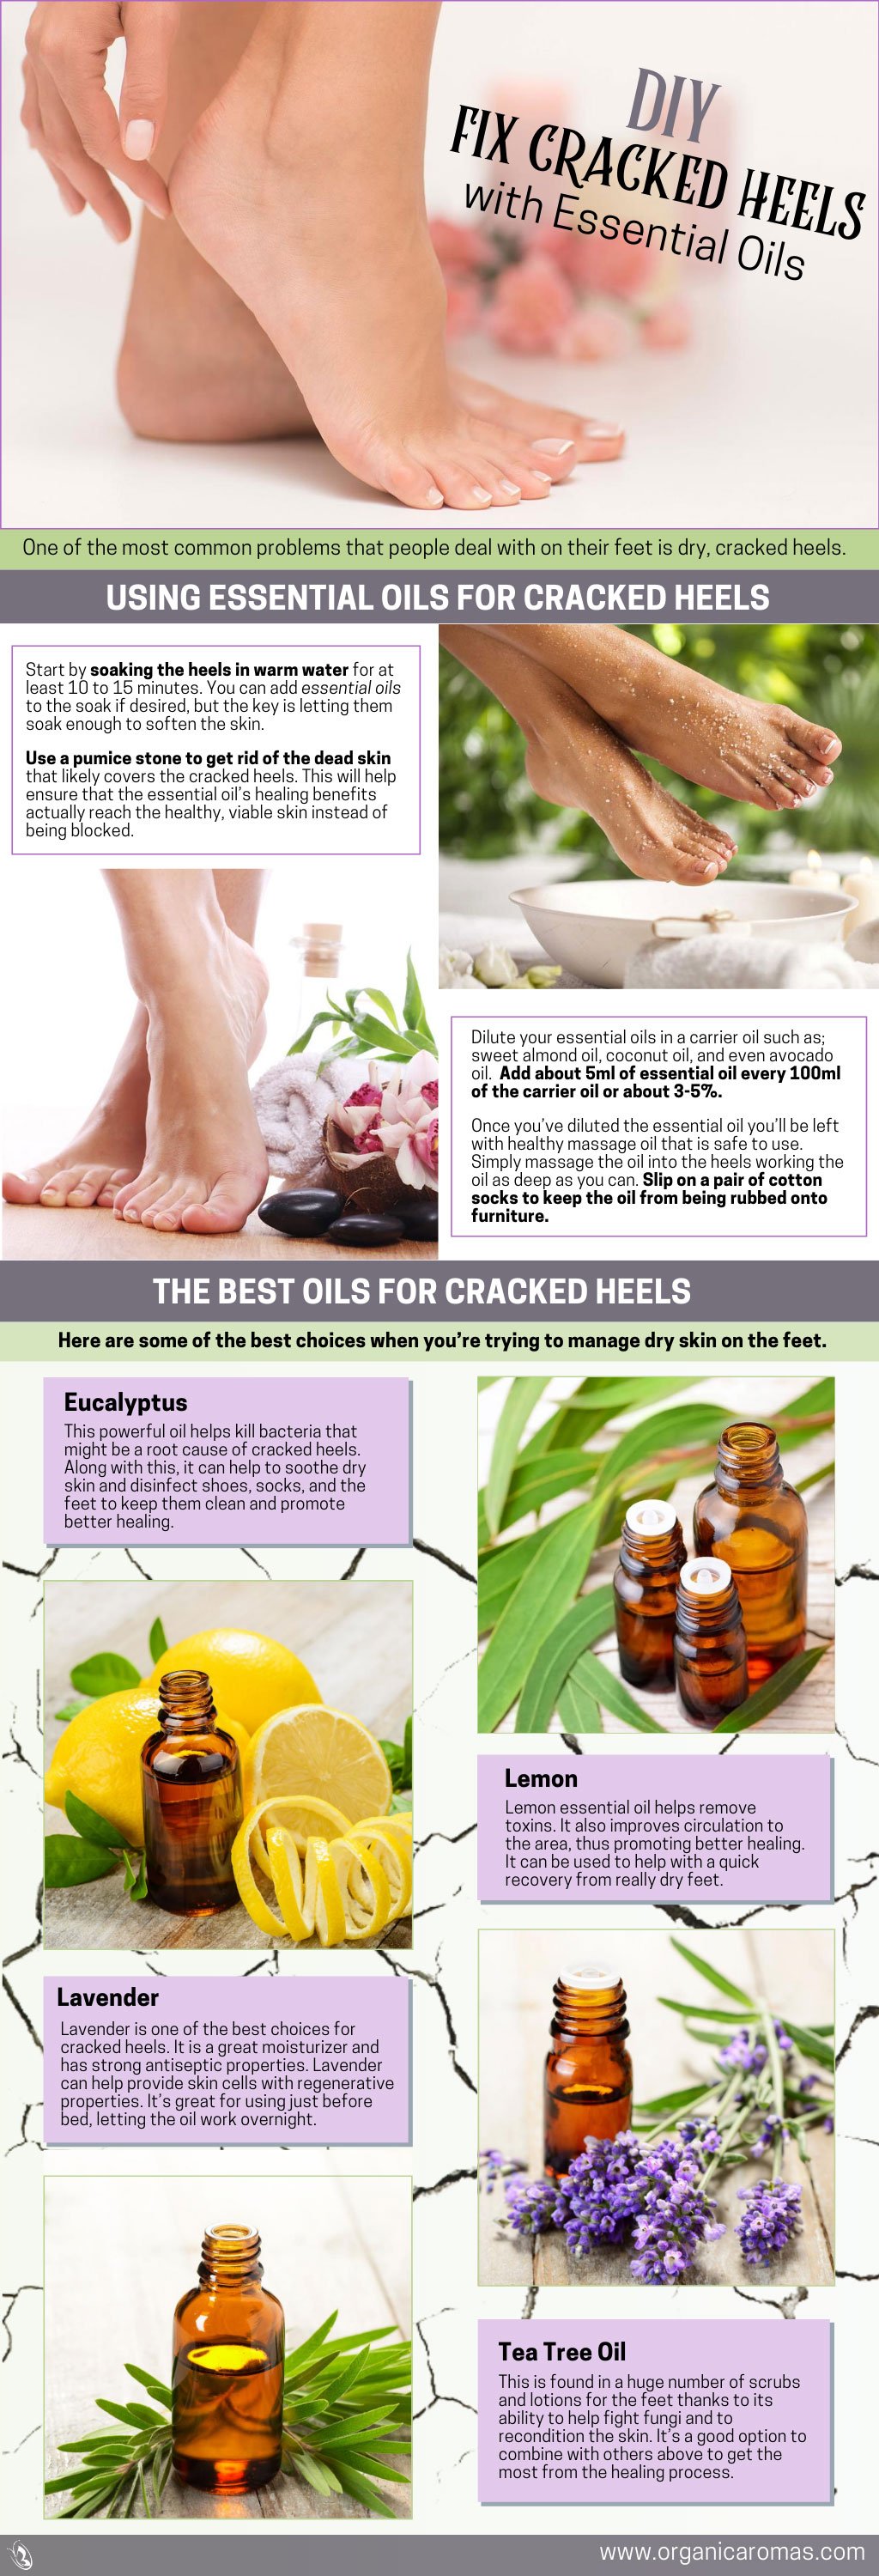 Amazon.com: Sole Mates - Cracked Heel Healers You can begin healing painful  cracks and rough, dry heels instantly Don't mess with lotions and  pedicures- heal your cracked skin naturally from the inside